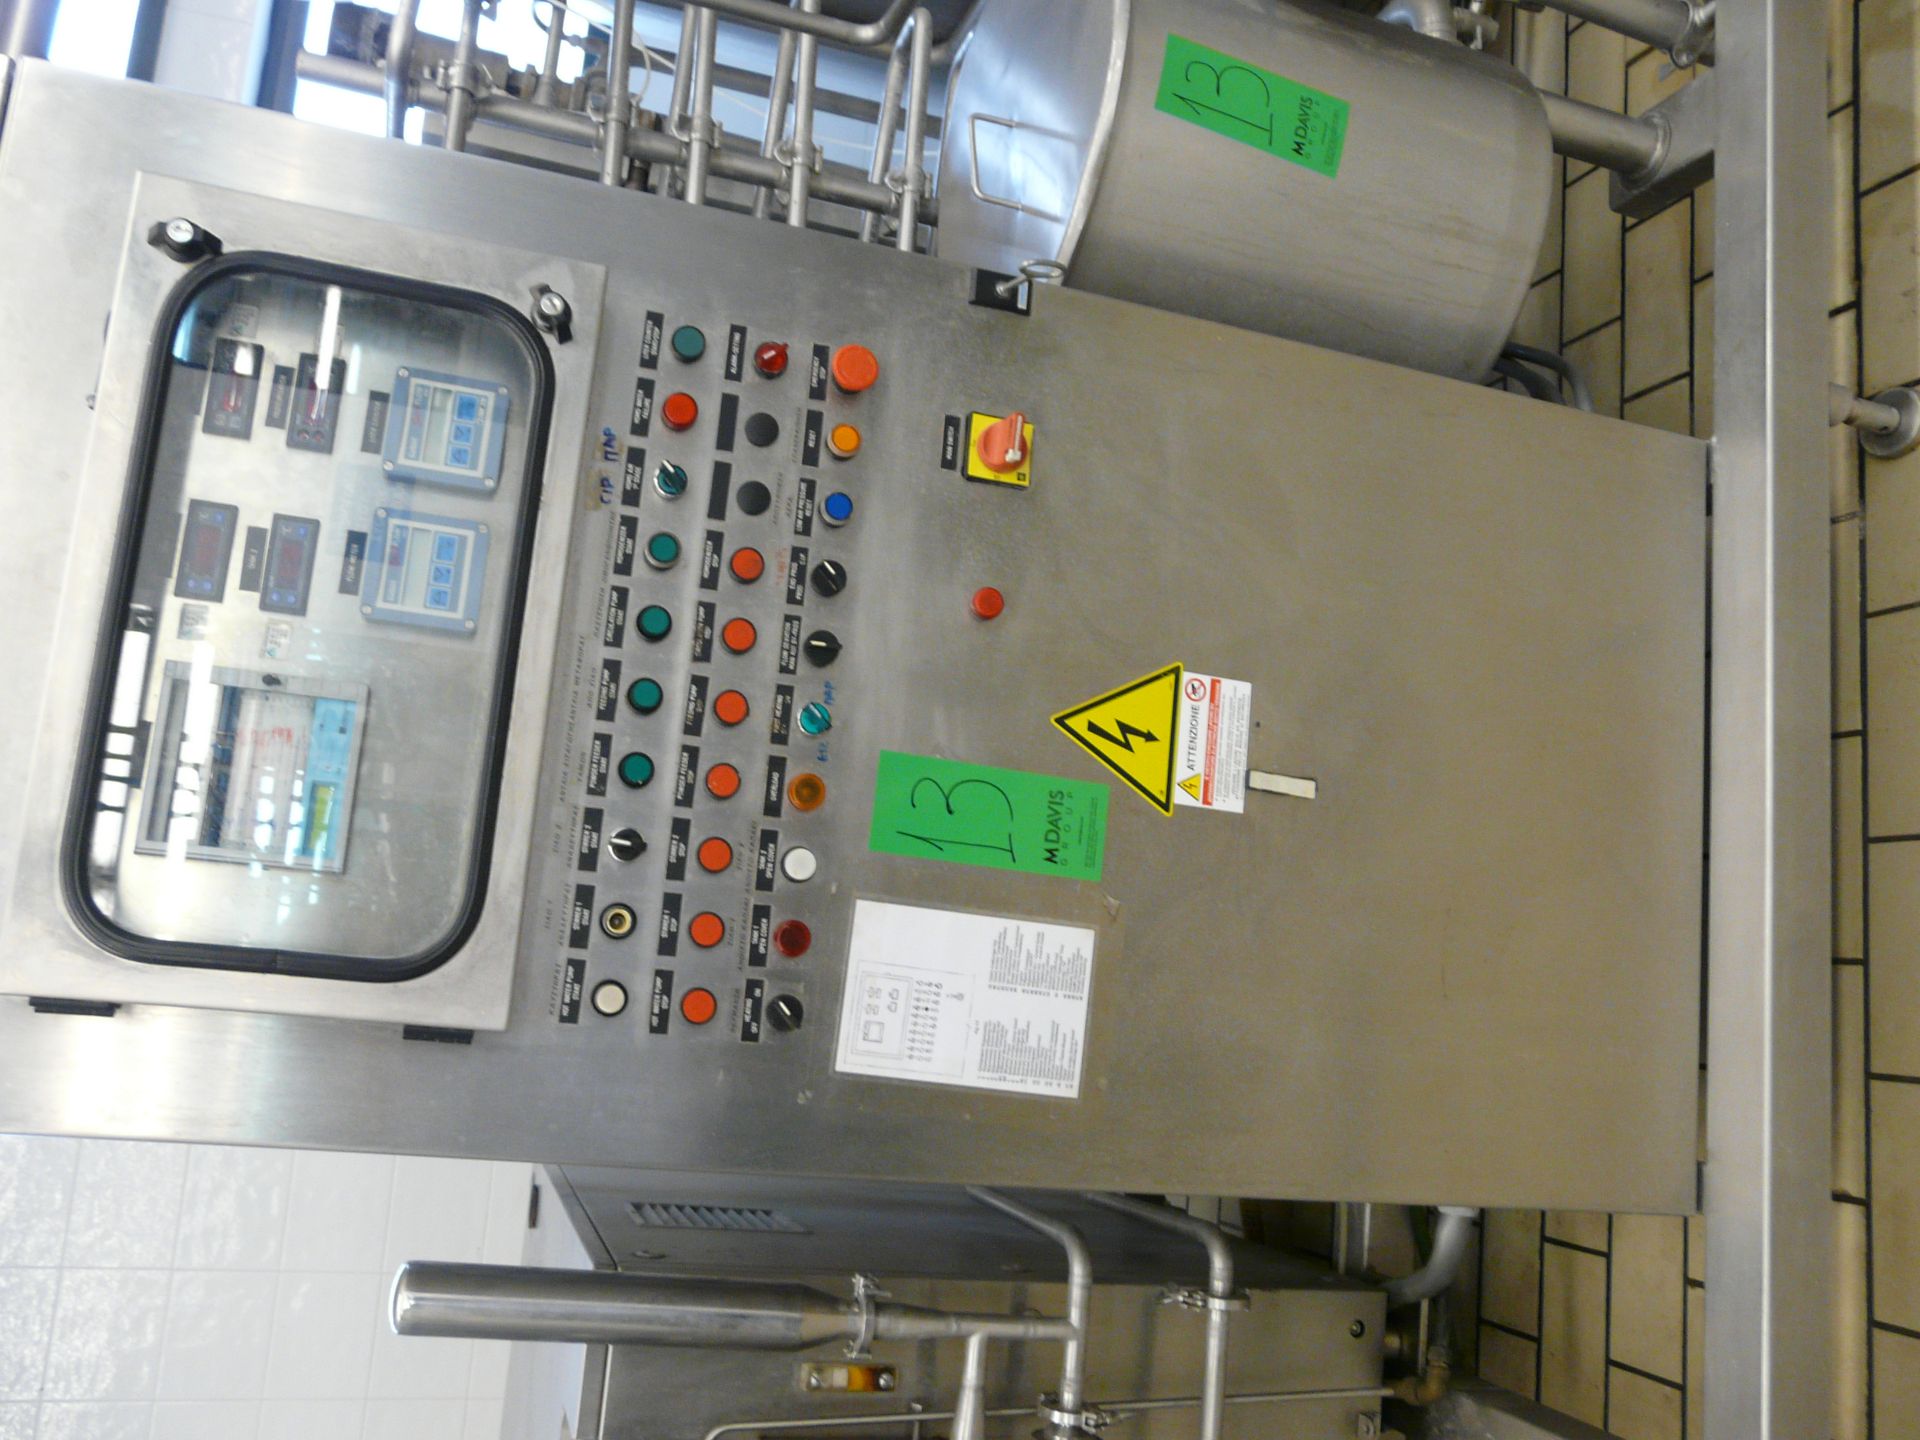 English: TETRA PAK HOYER HTST SYSTEM, 1200 Pasteurizer for Ice Cream, Contains 2 x Tanks with - Image 7 of 45